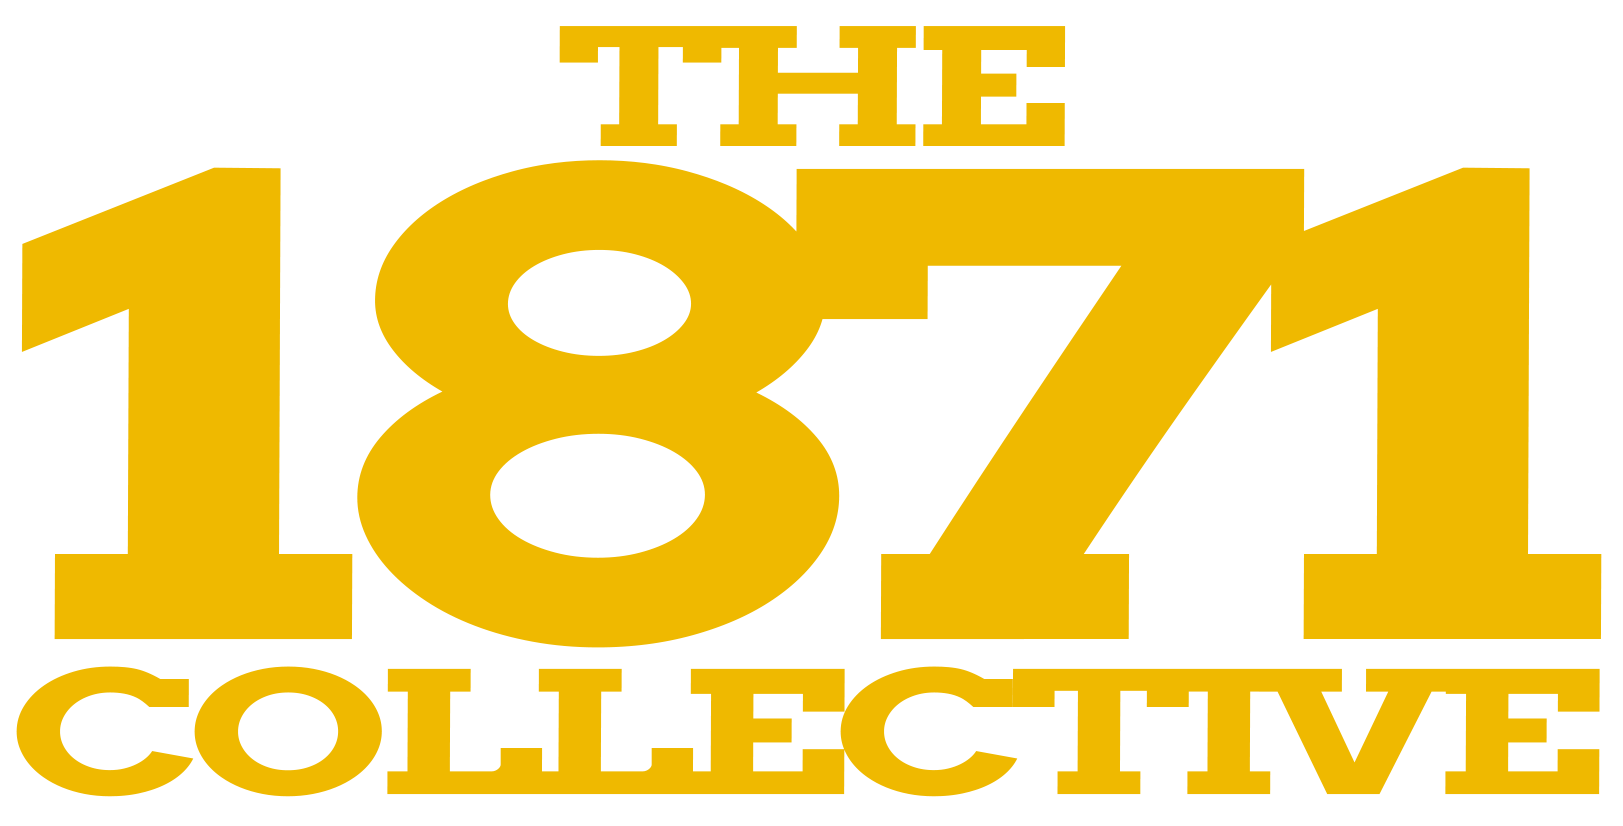 THE 1871 COLLECTIVE